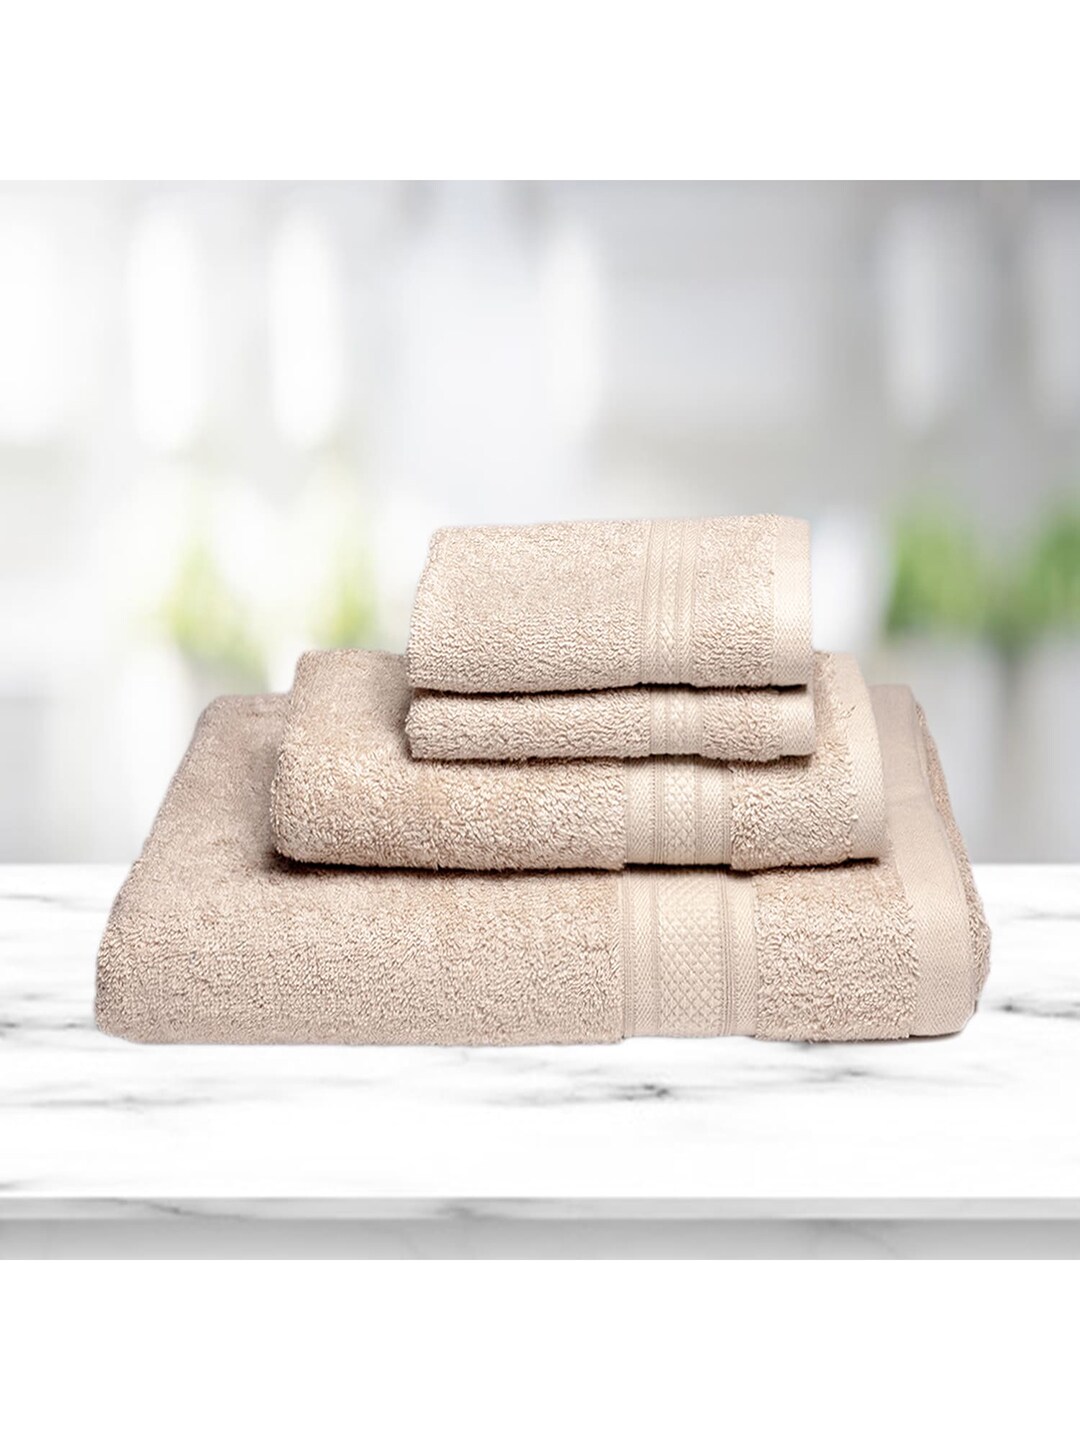 Kawach Cream-Colored Antimicrobial Soft Bamboo Towel Set Price in India